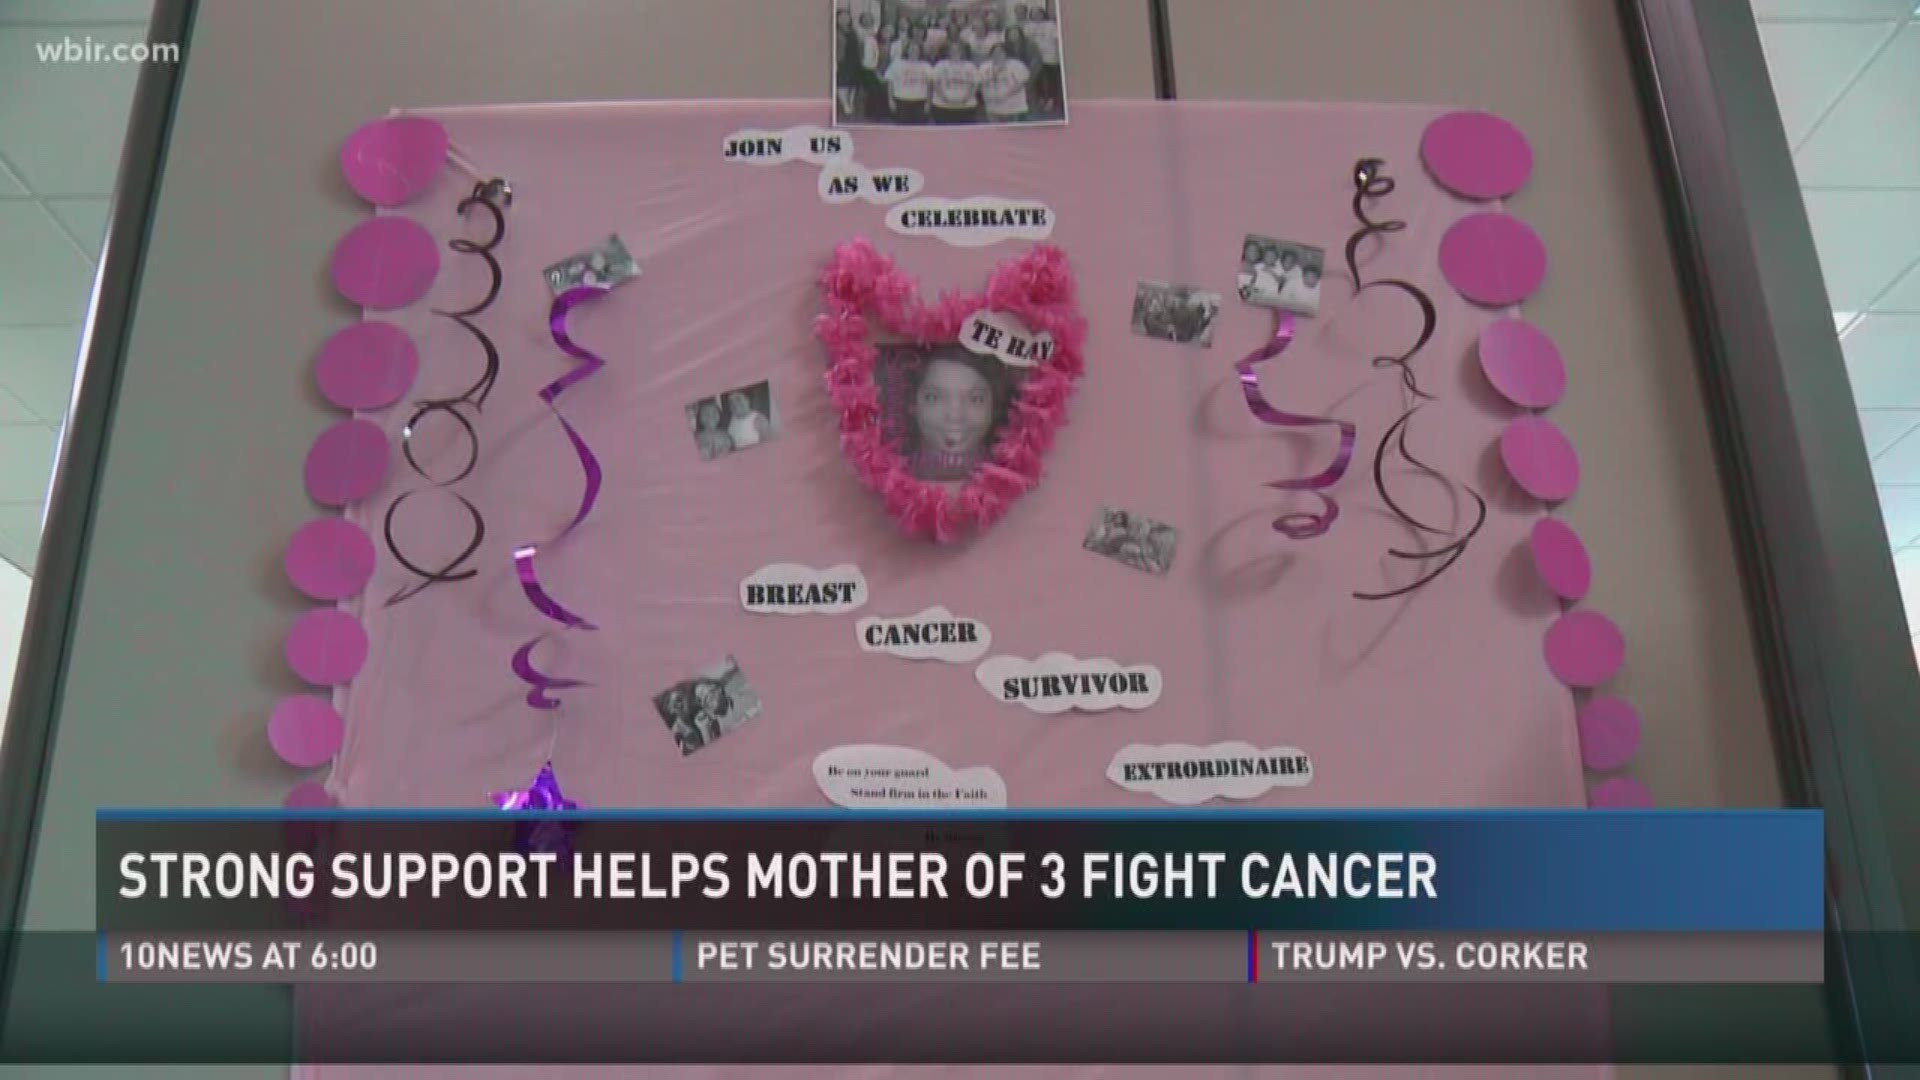 WBIR 10news Reporter Leslie Ackerson introduces us to one cancer fighter who is staying upbeat, thanks to an incredible support system.